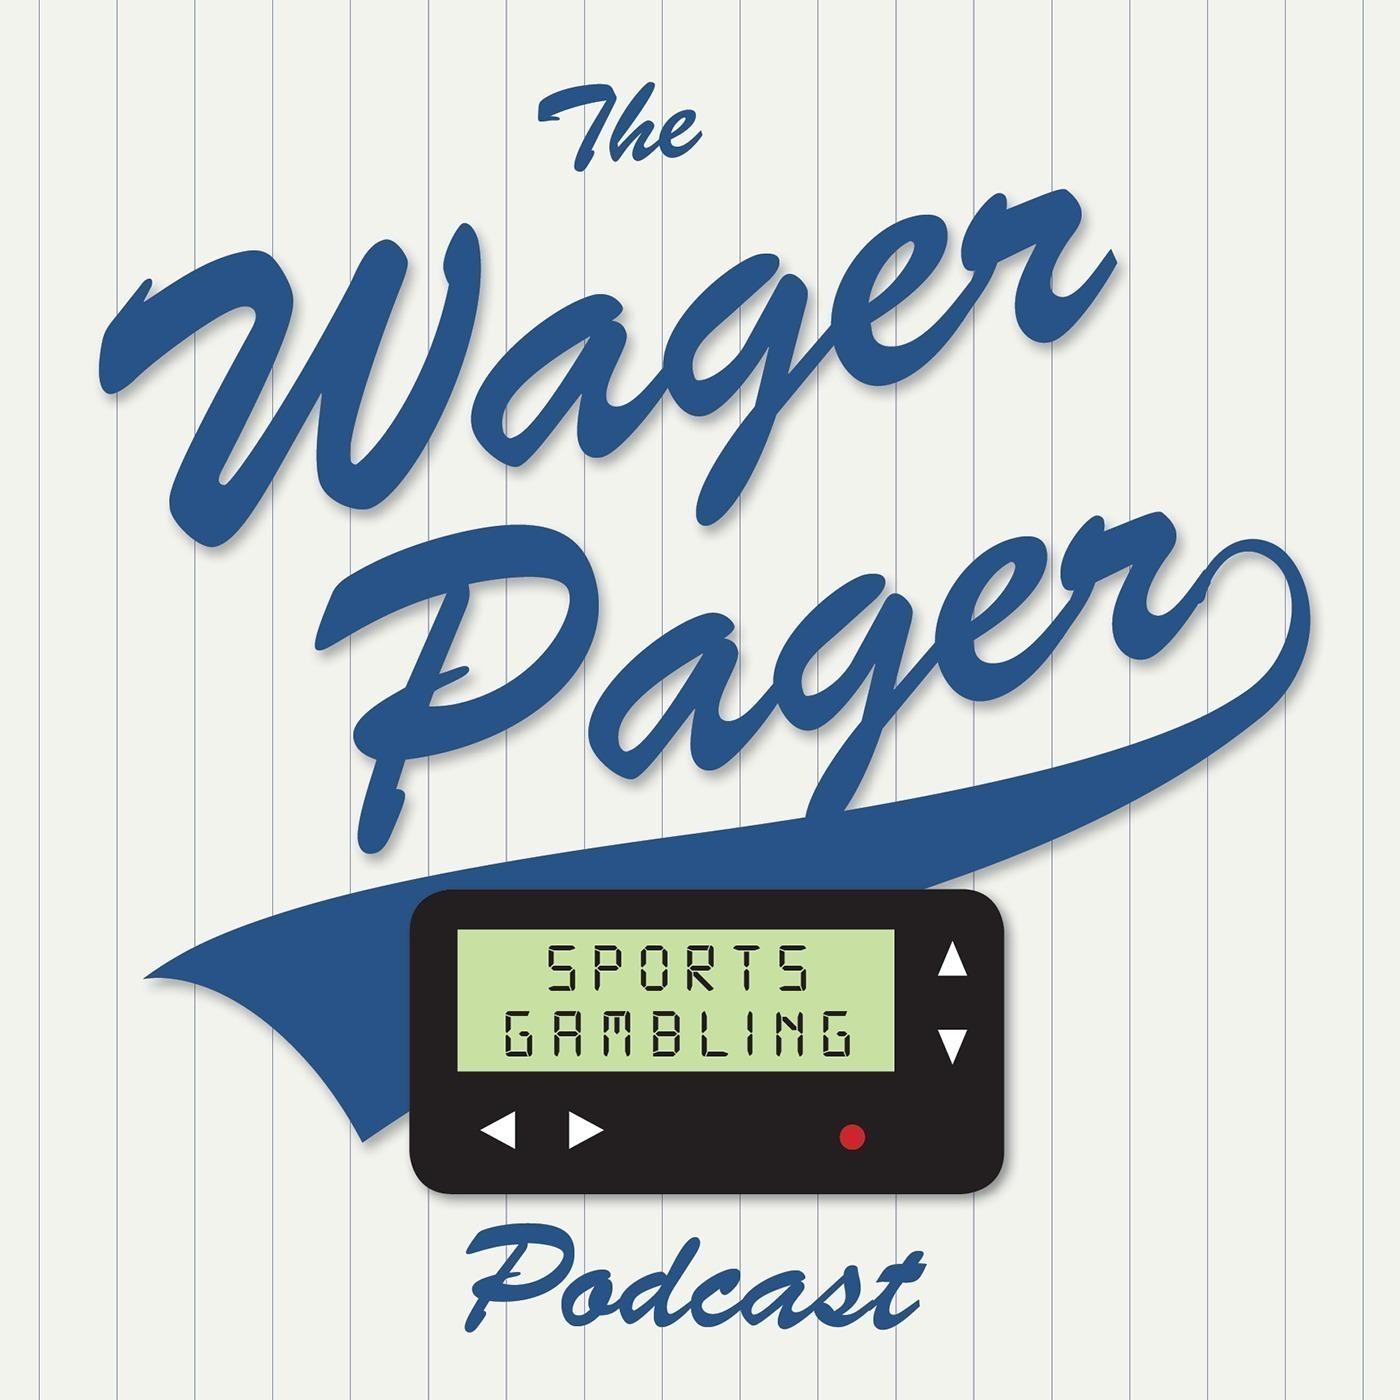 The Wager Pager Sports Gambling Podcast